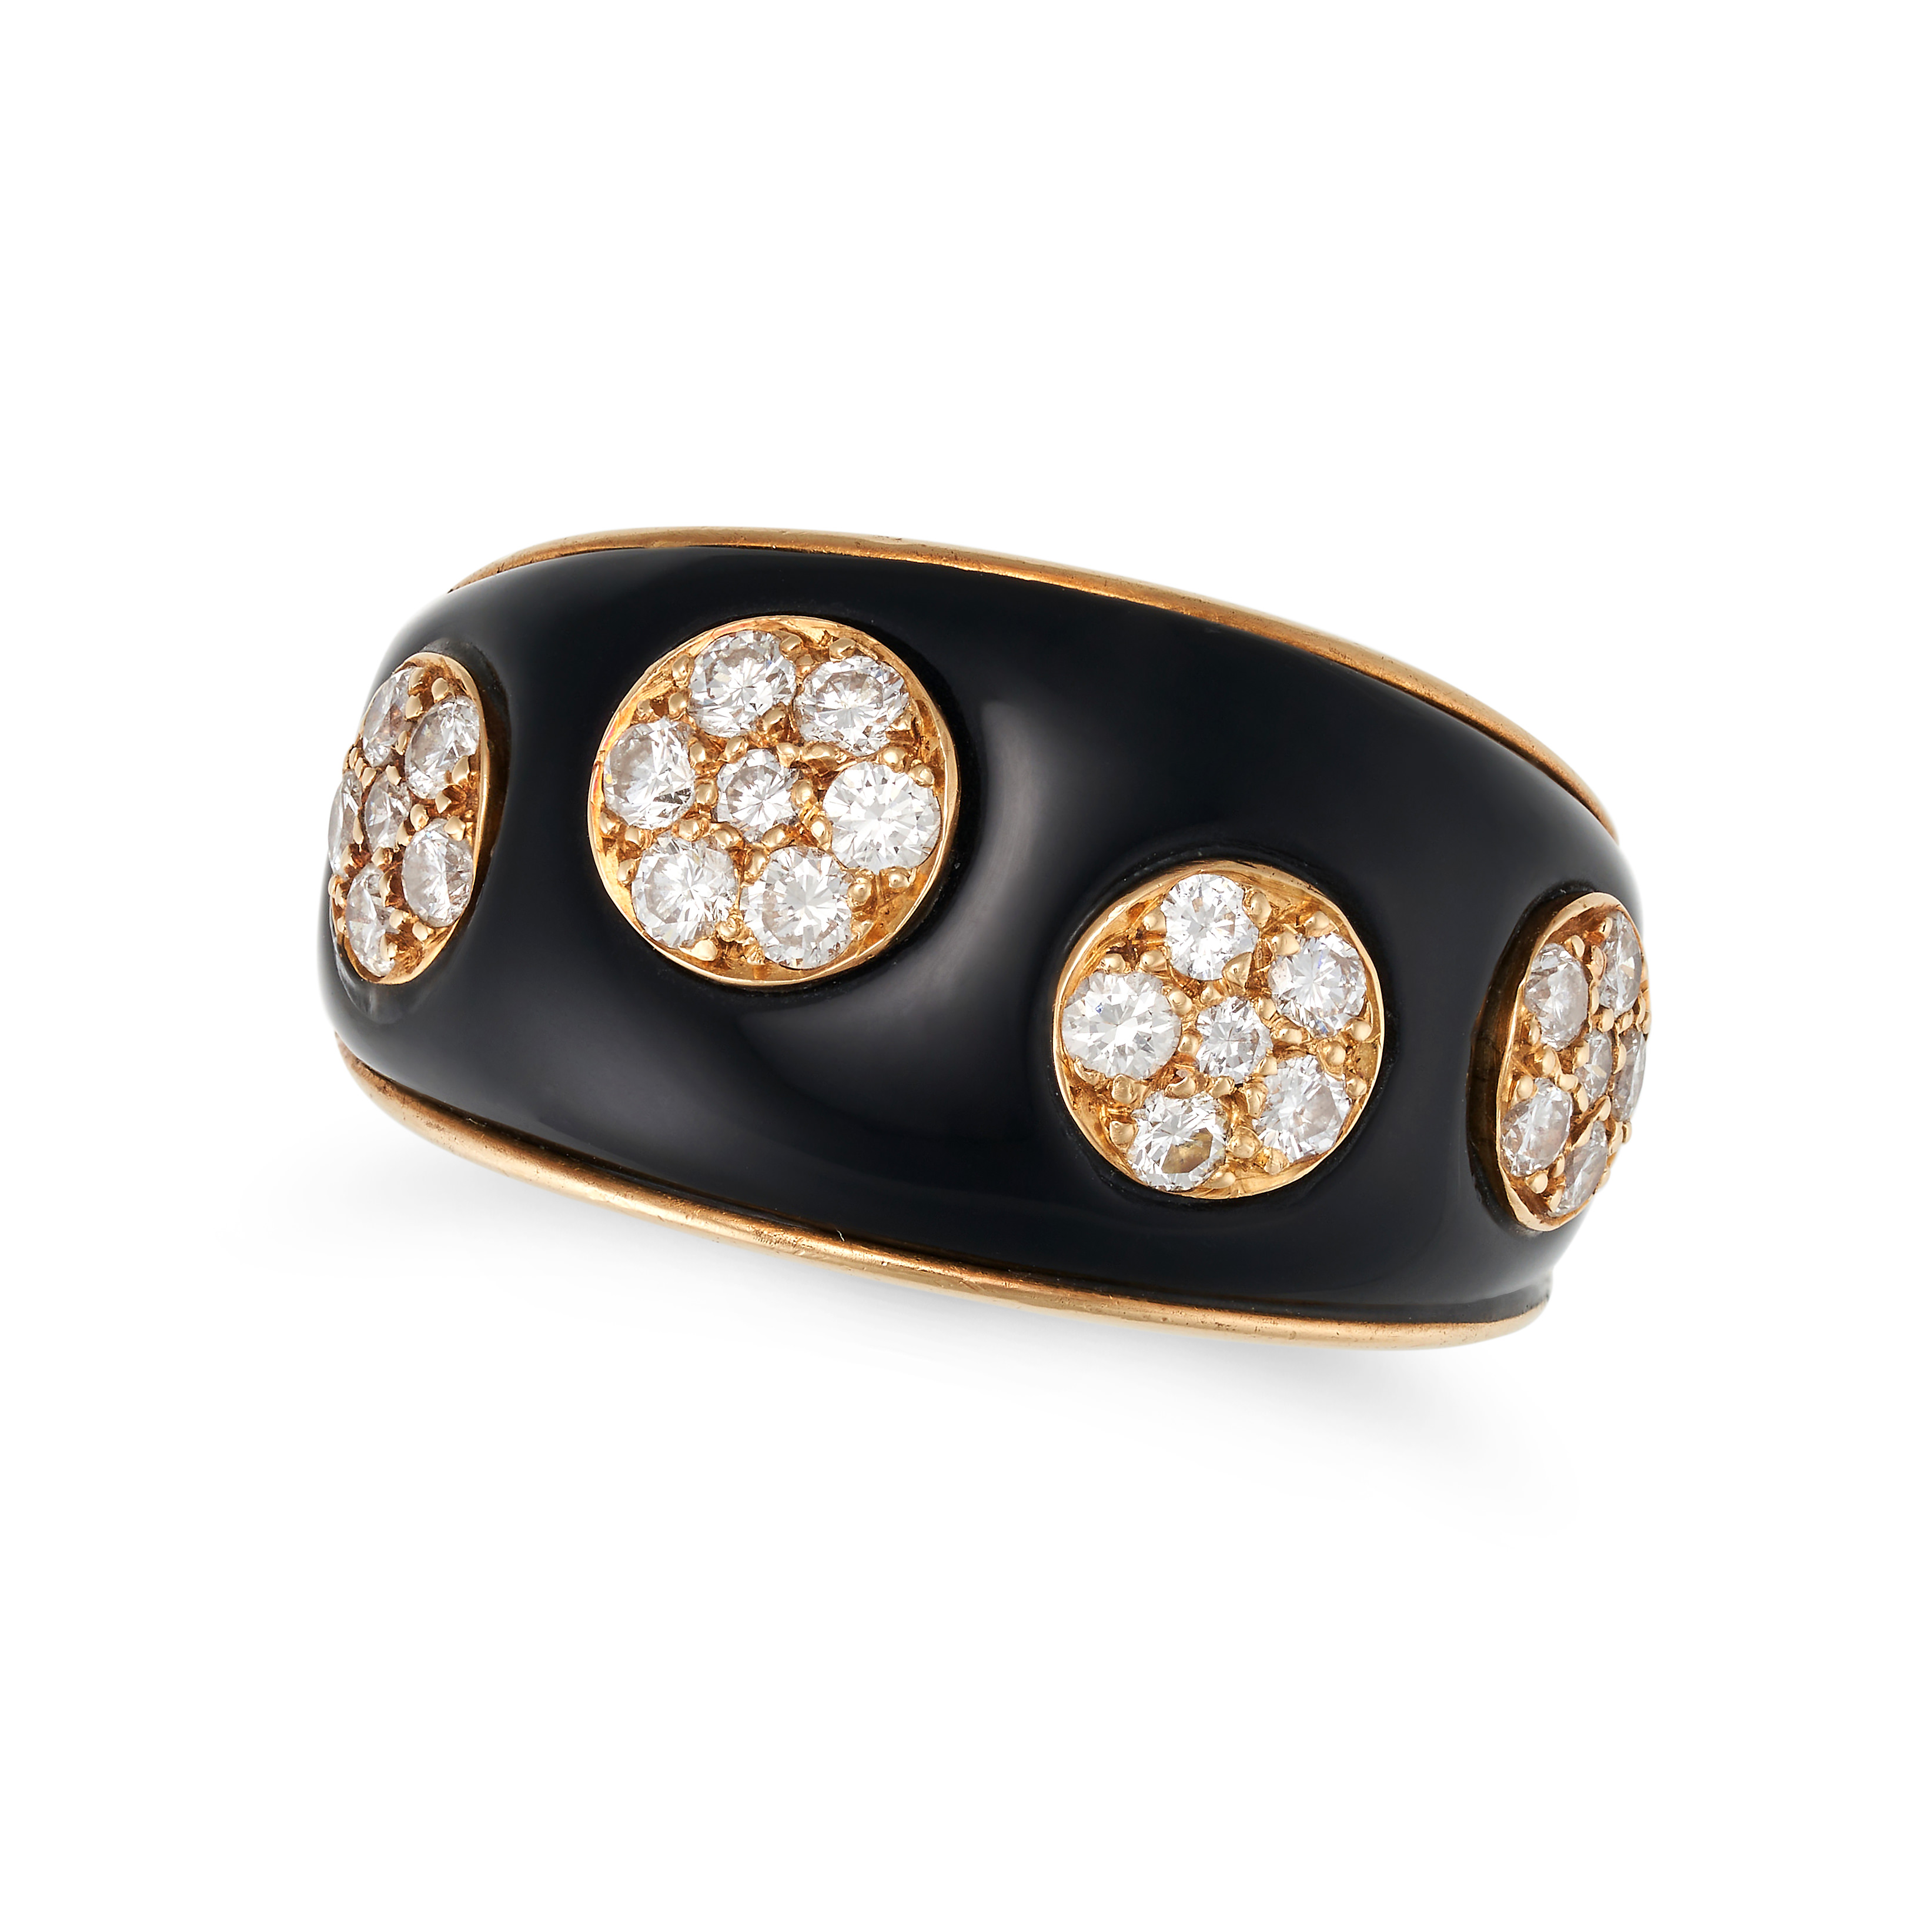 VAN CLEEF & ARPELS, A VINTAGE ONYX AND DIAMOND BOMBE RING in 18ct yellow gold, the bombe face set...